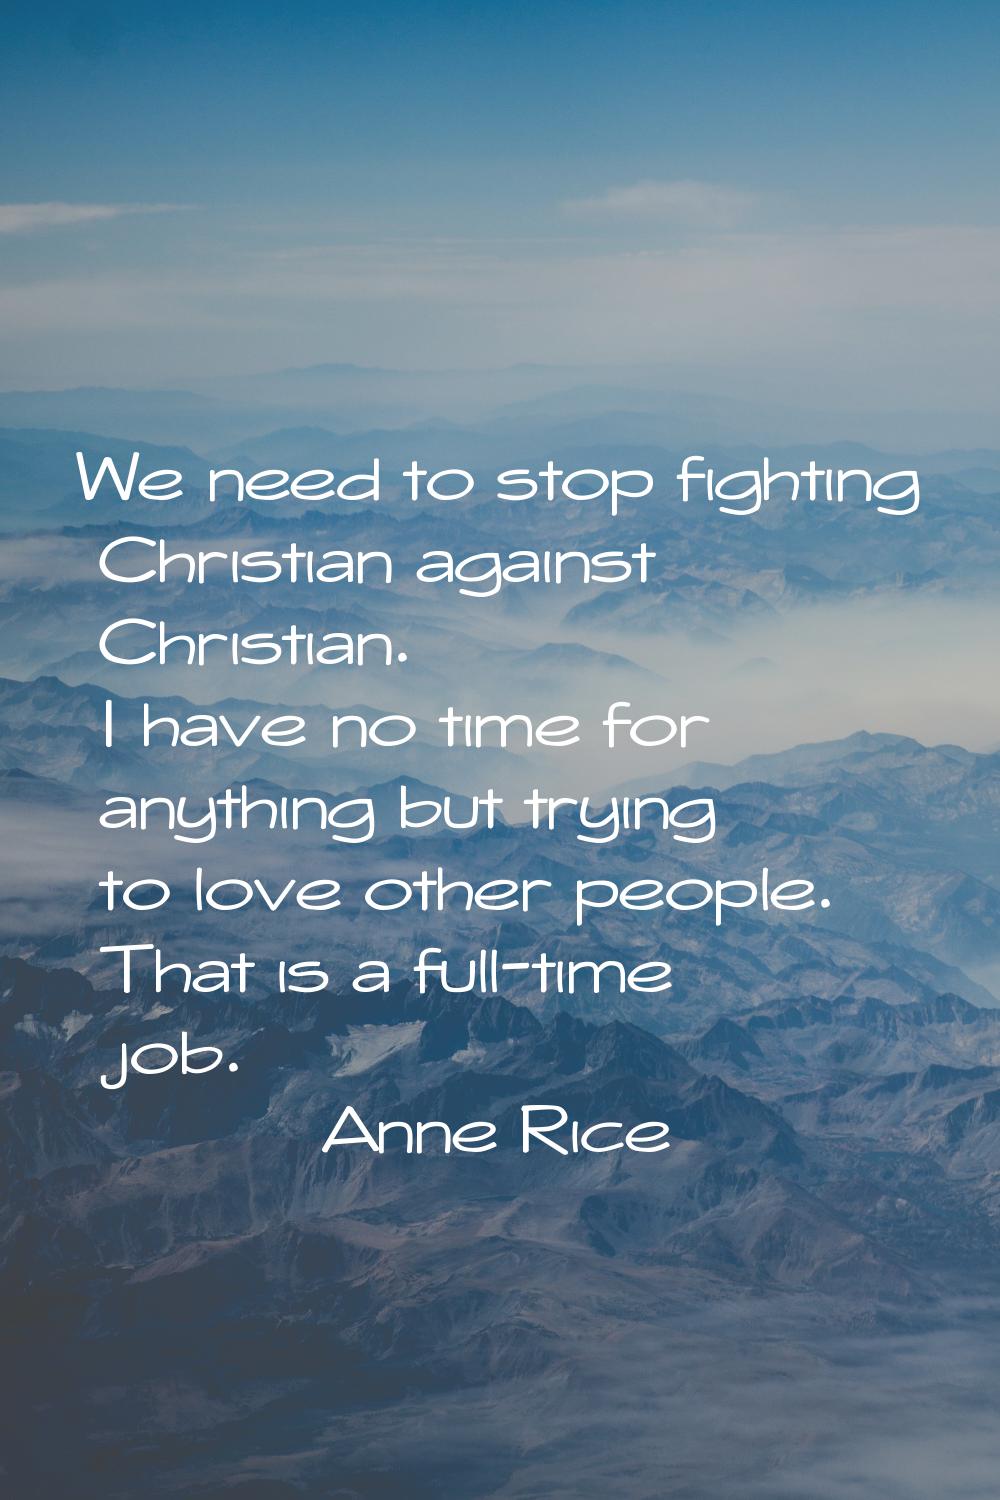 We need to stop fighting Christian against Christian. I have no time for anything but trying to lov